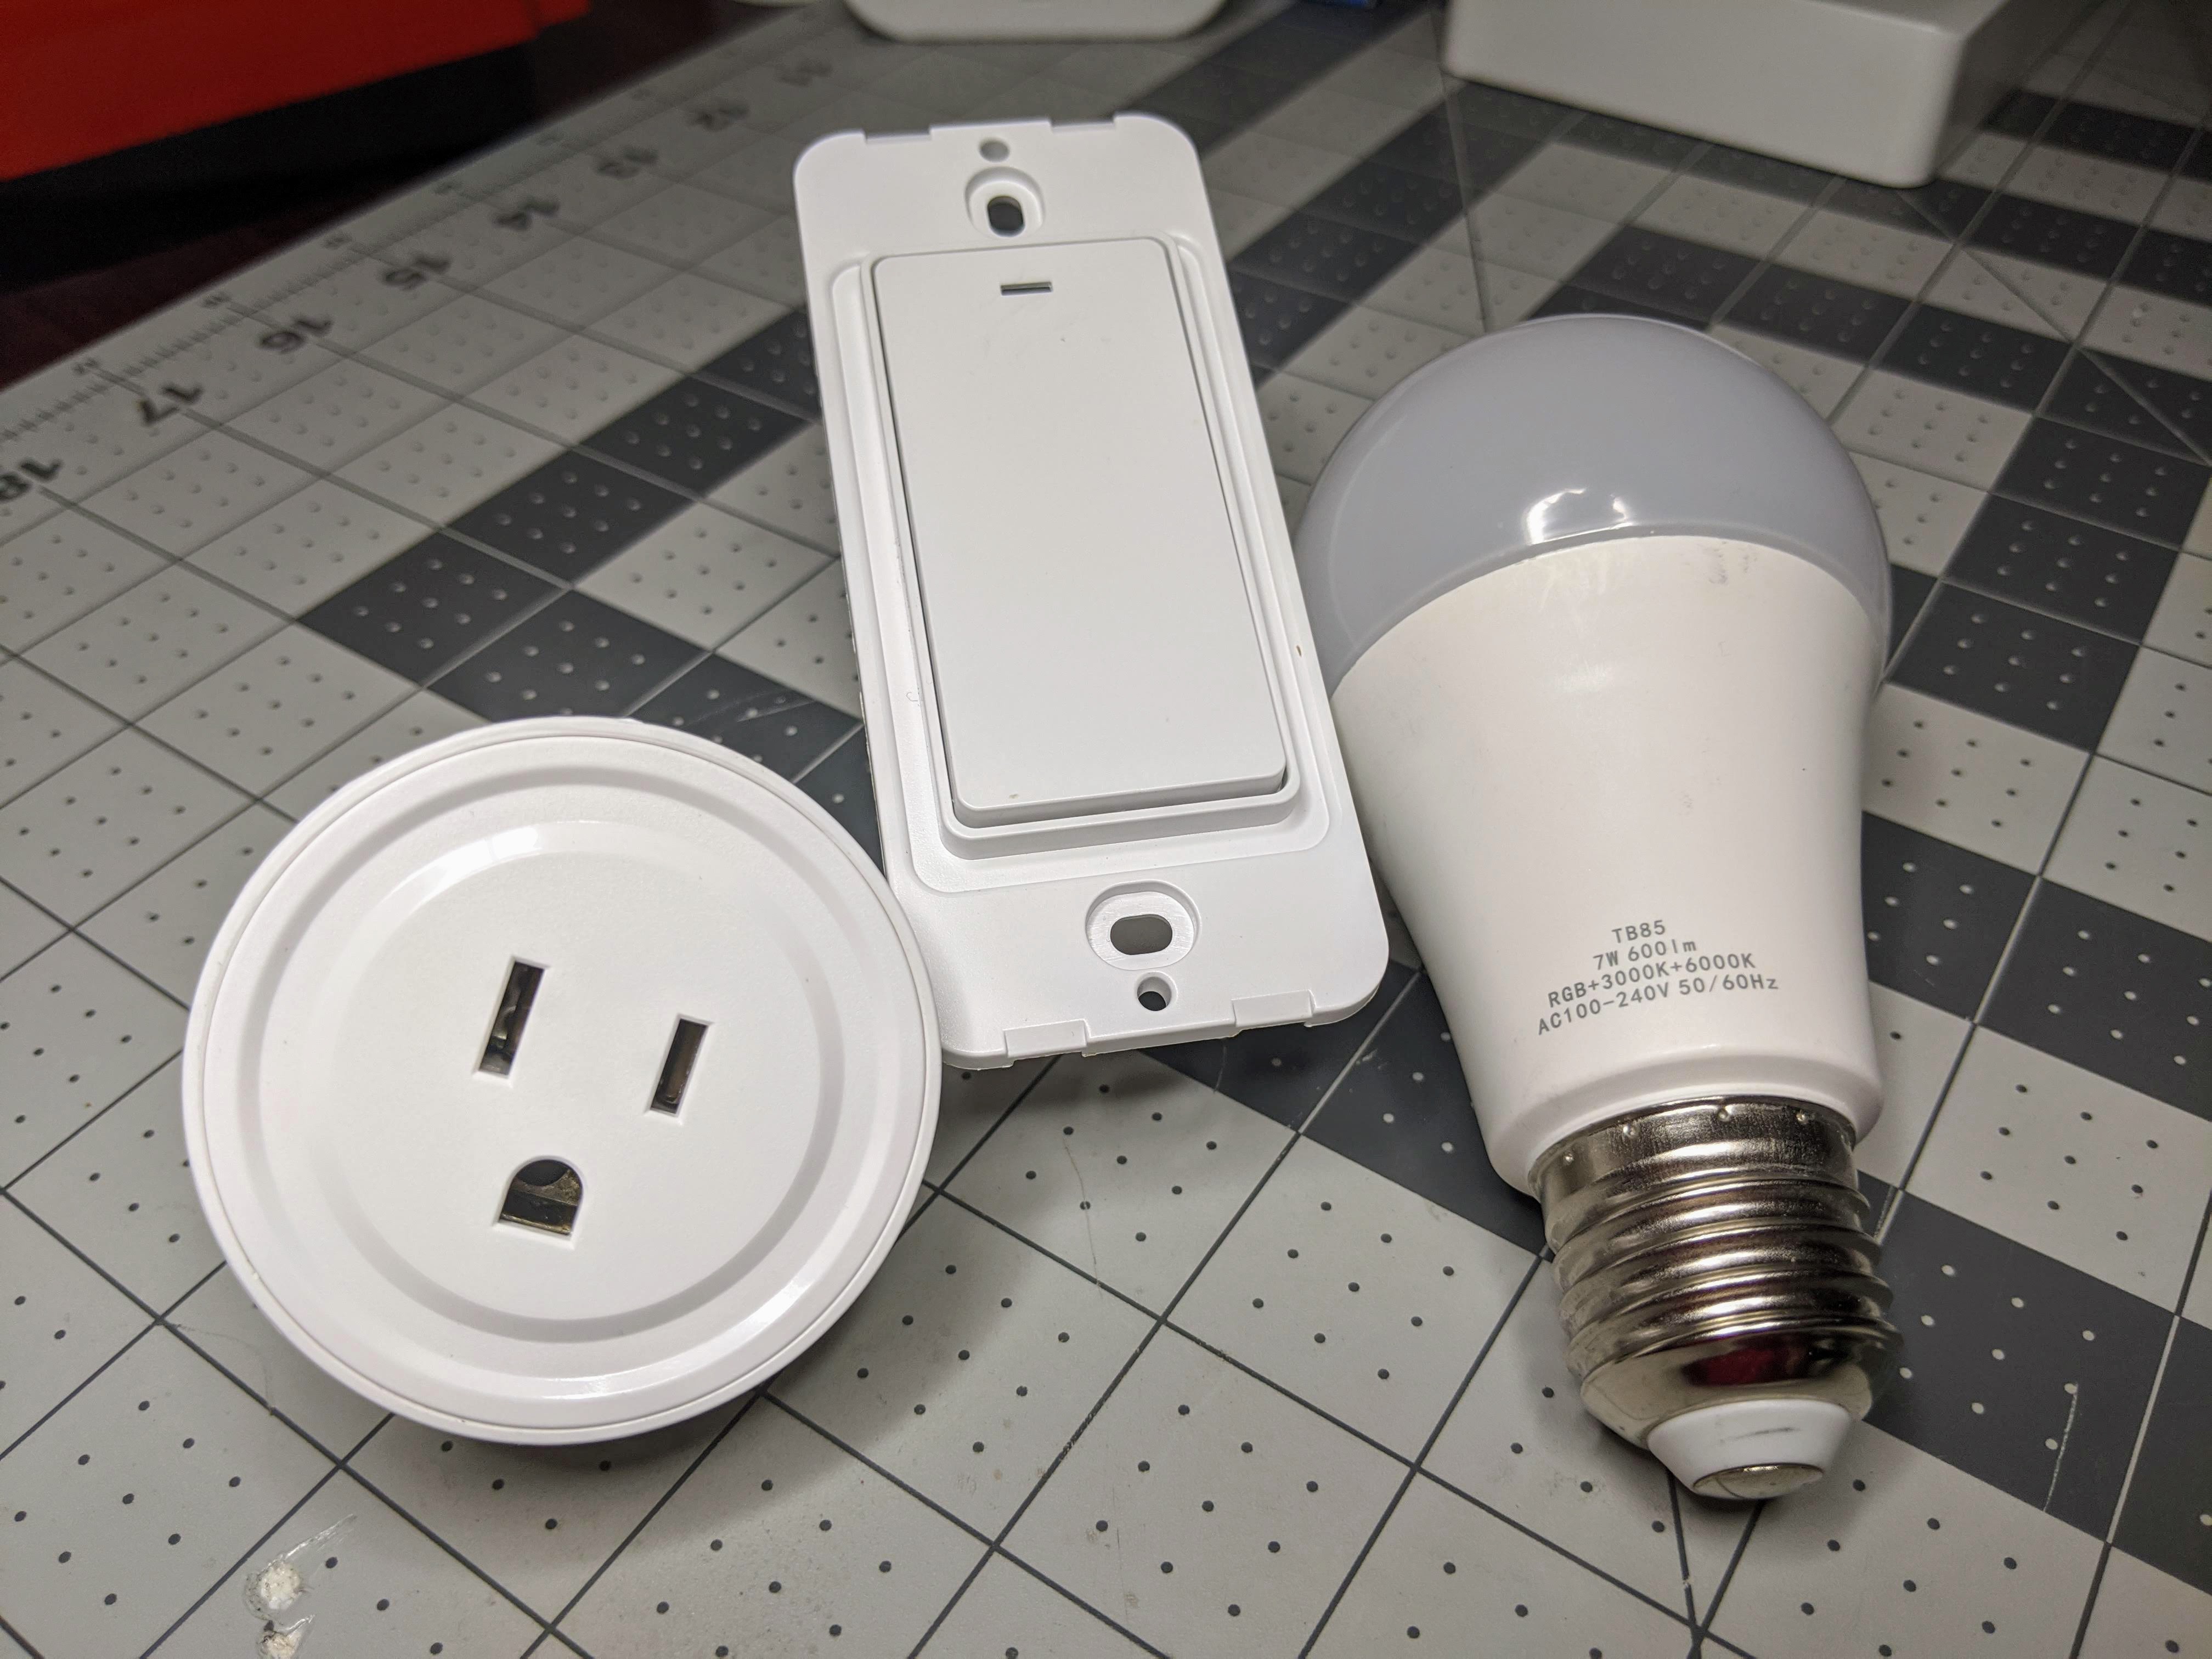 Do you still lack a smart plug in your home